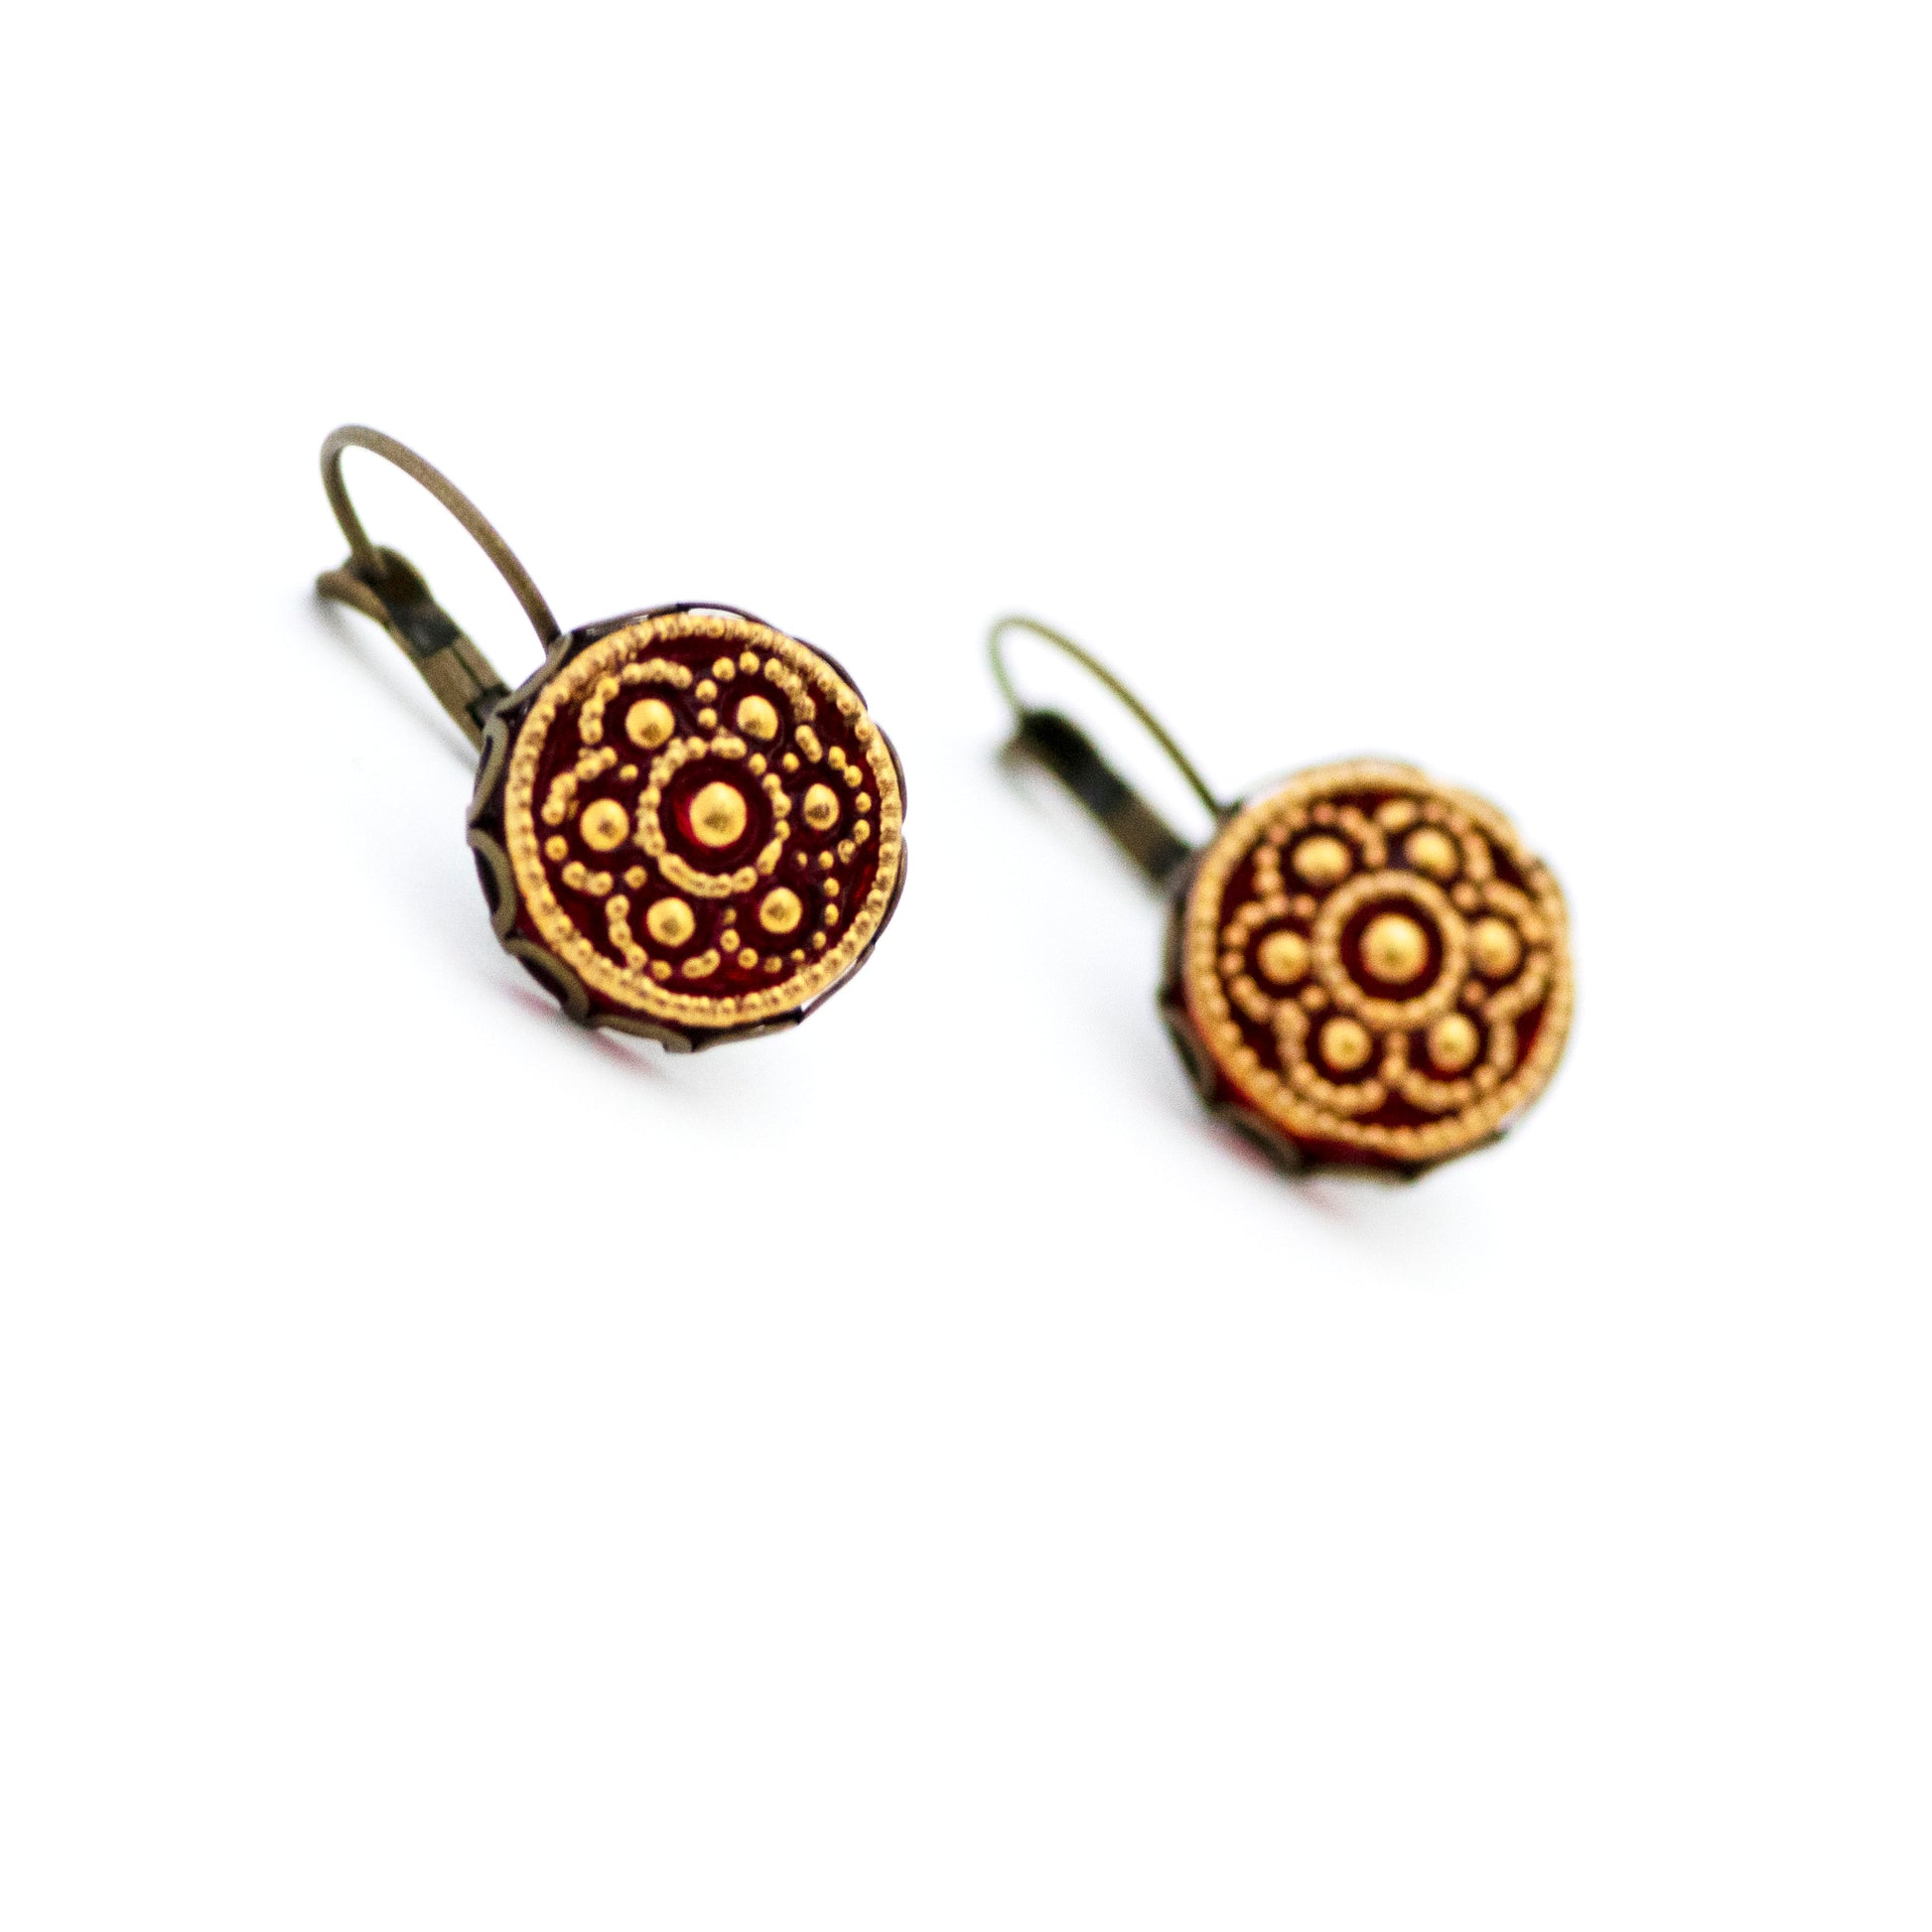 Red and gold circles flower Czech glass buttons. Leverback earrings.